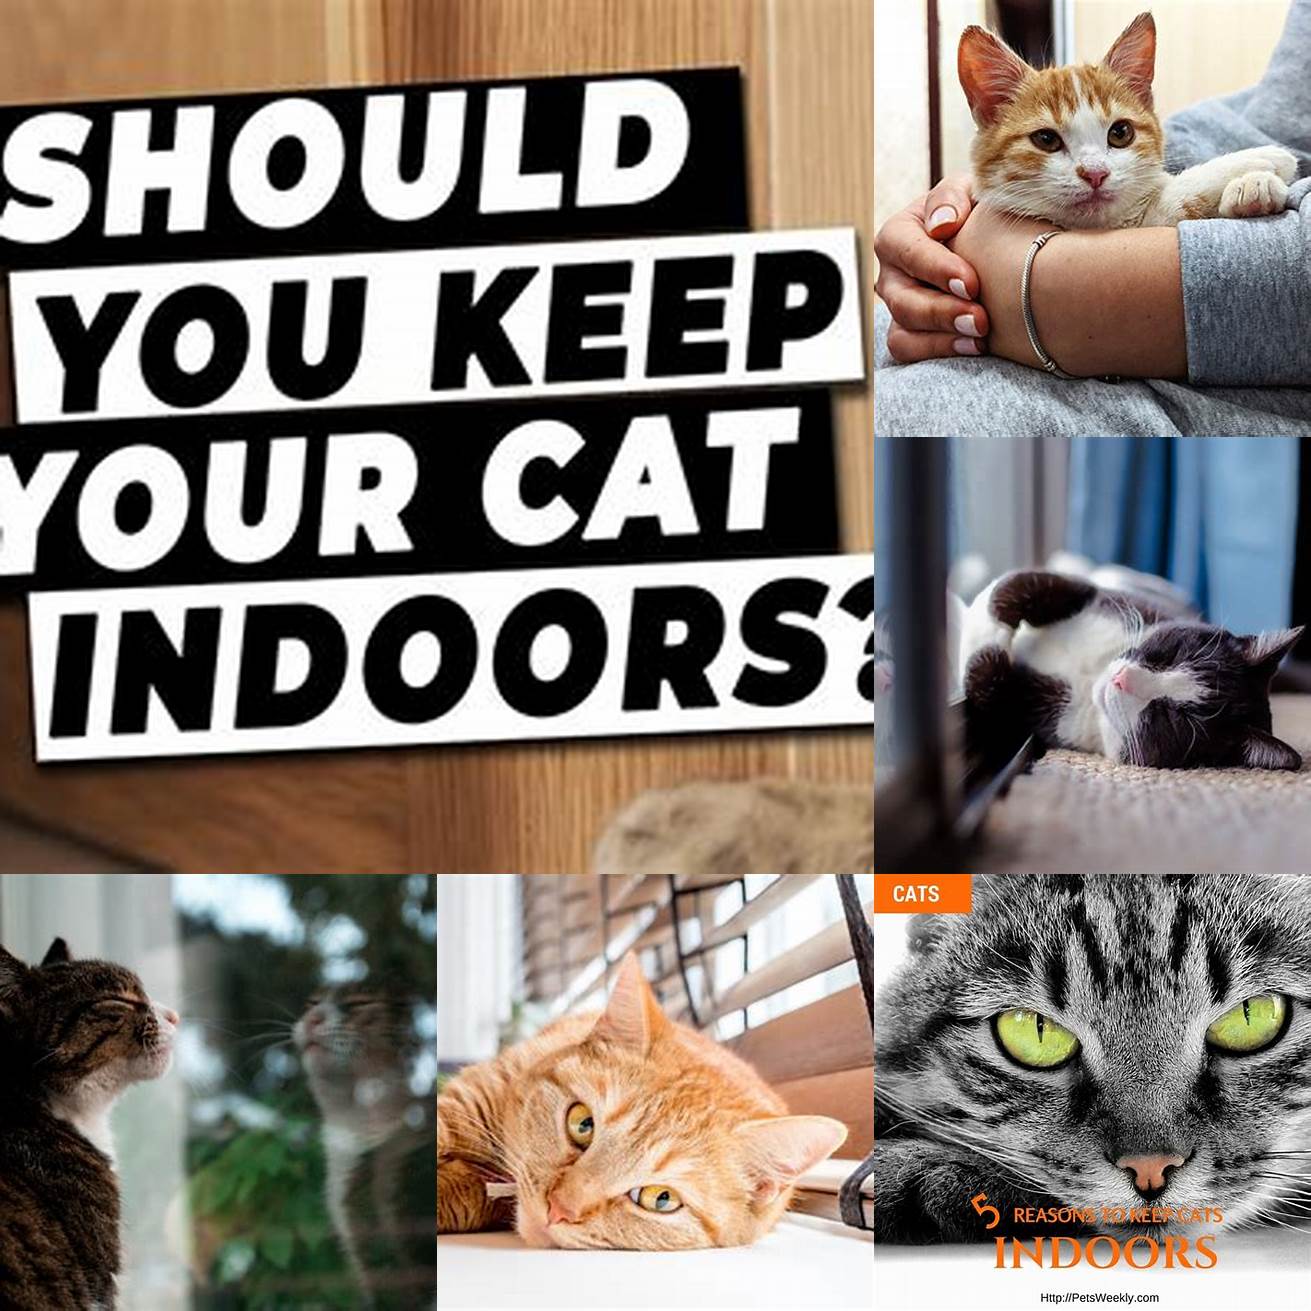 Keep your cat indoors as much as possible to limit exposure to other animals and humans